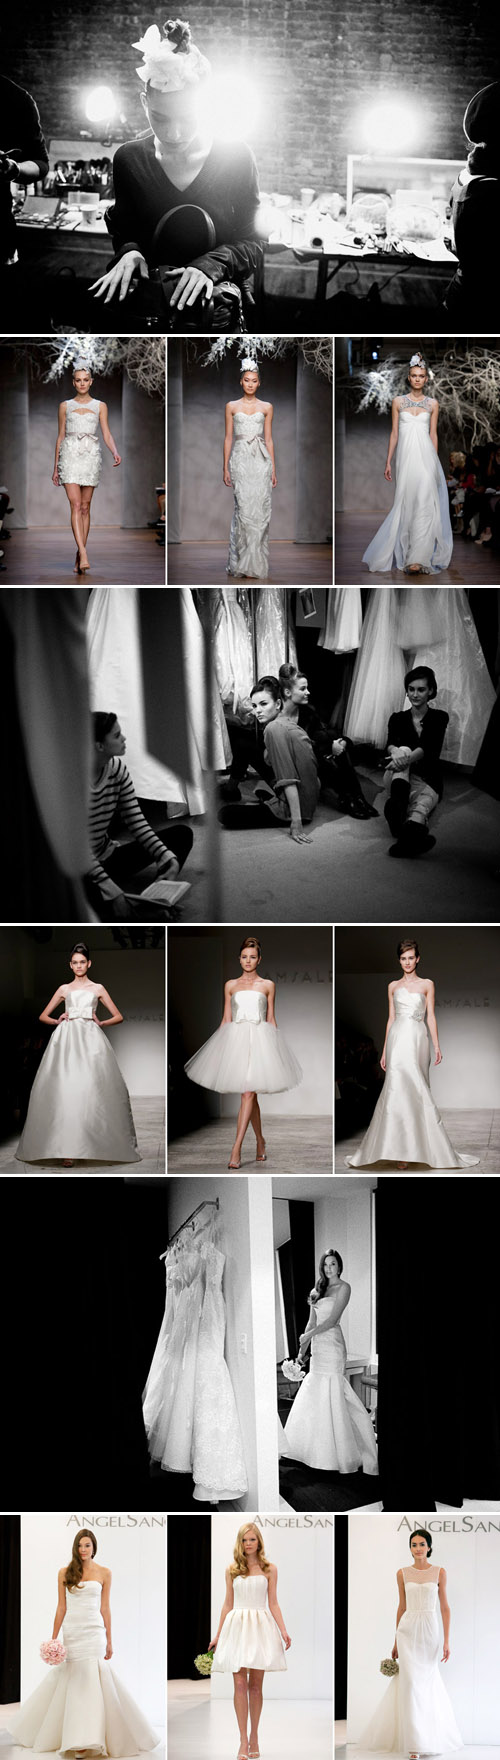 Junebug's all new Bridal Market Fashion Report!Featuring the fashion shows of Monique Lhuillier, Amsale and Angel Sanchez, photography by John and Joseph Photography and Jane Lee Photography